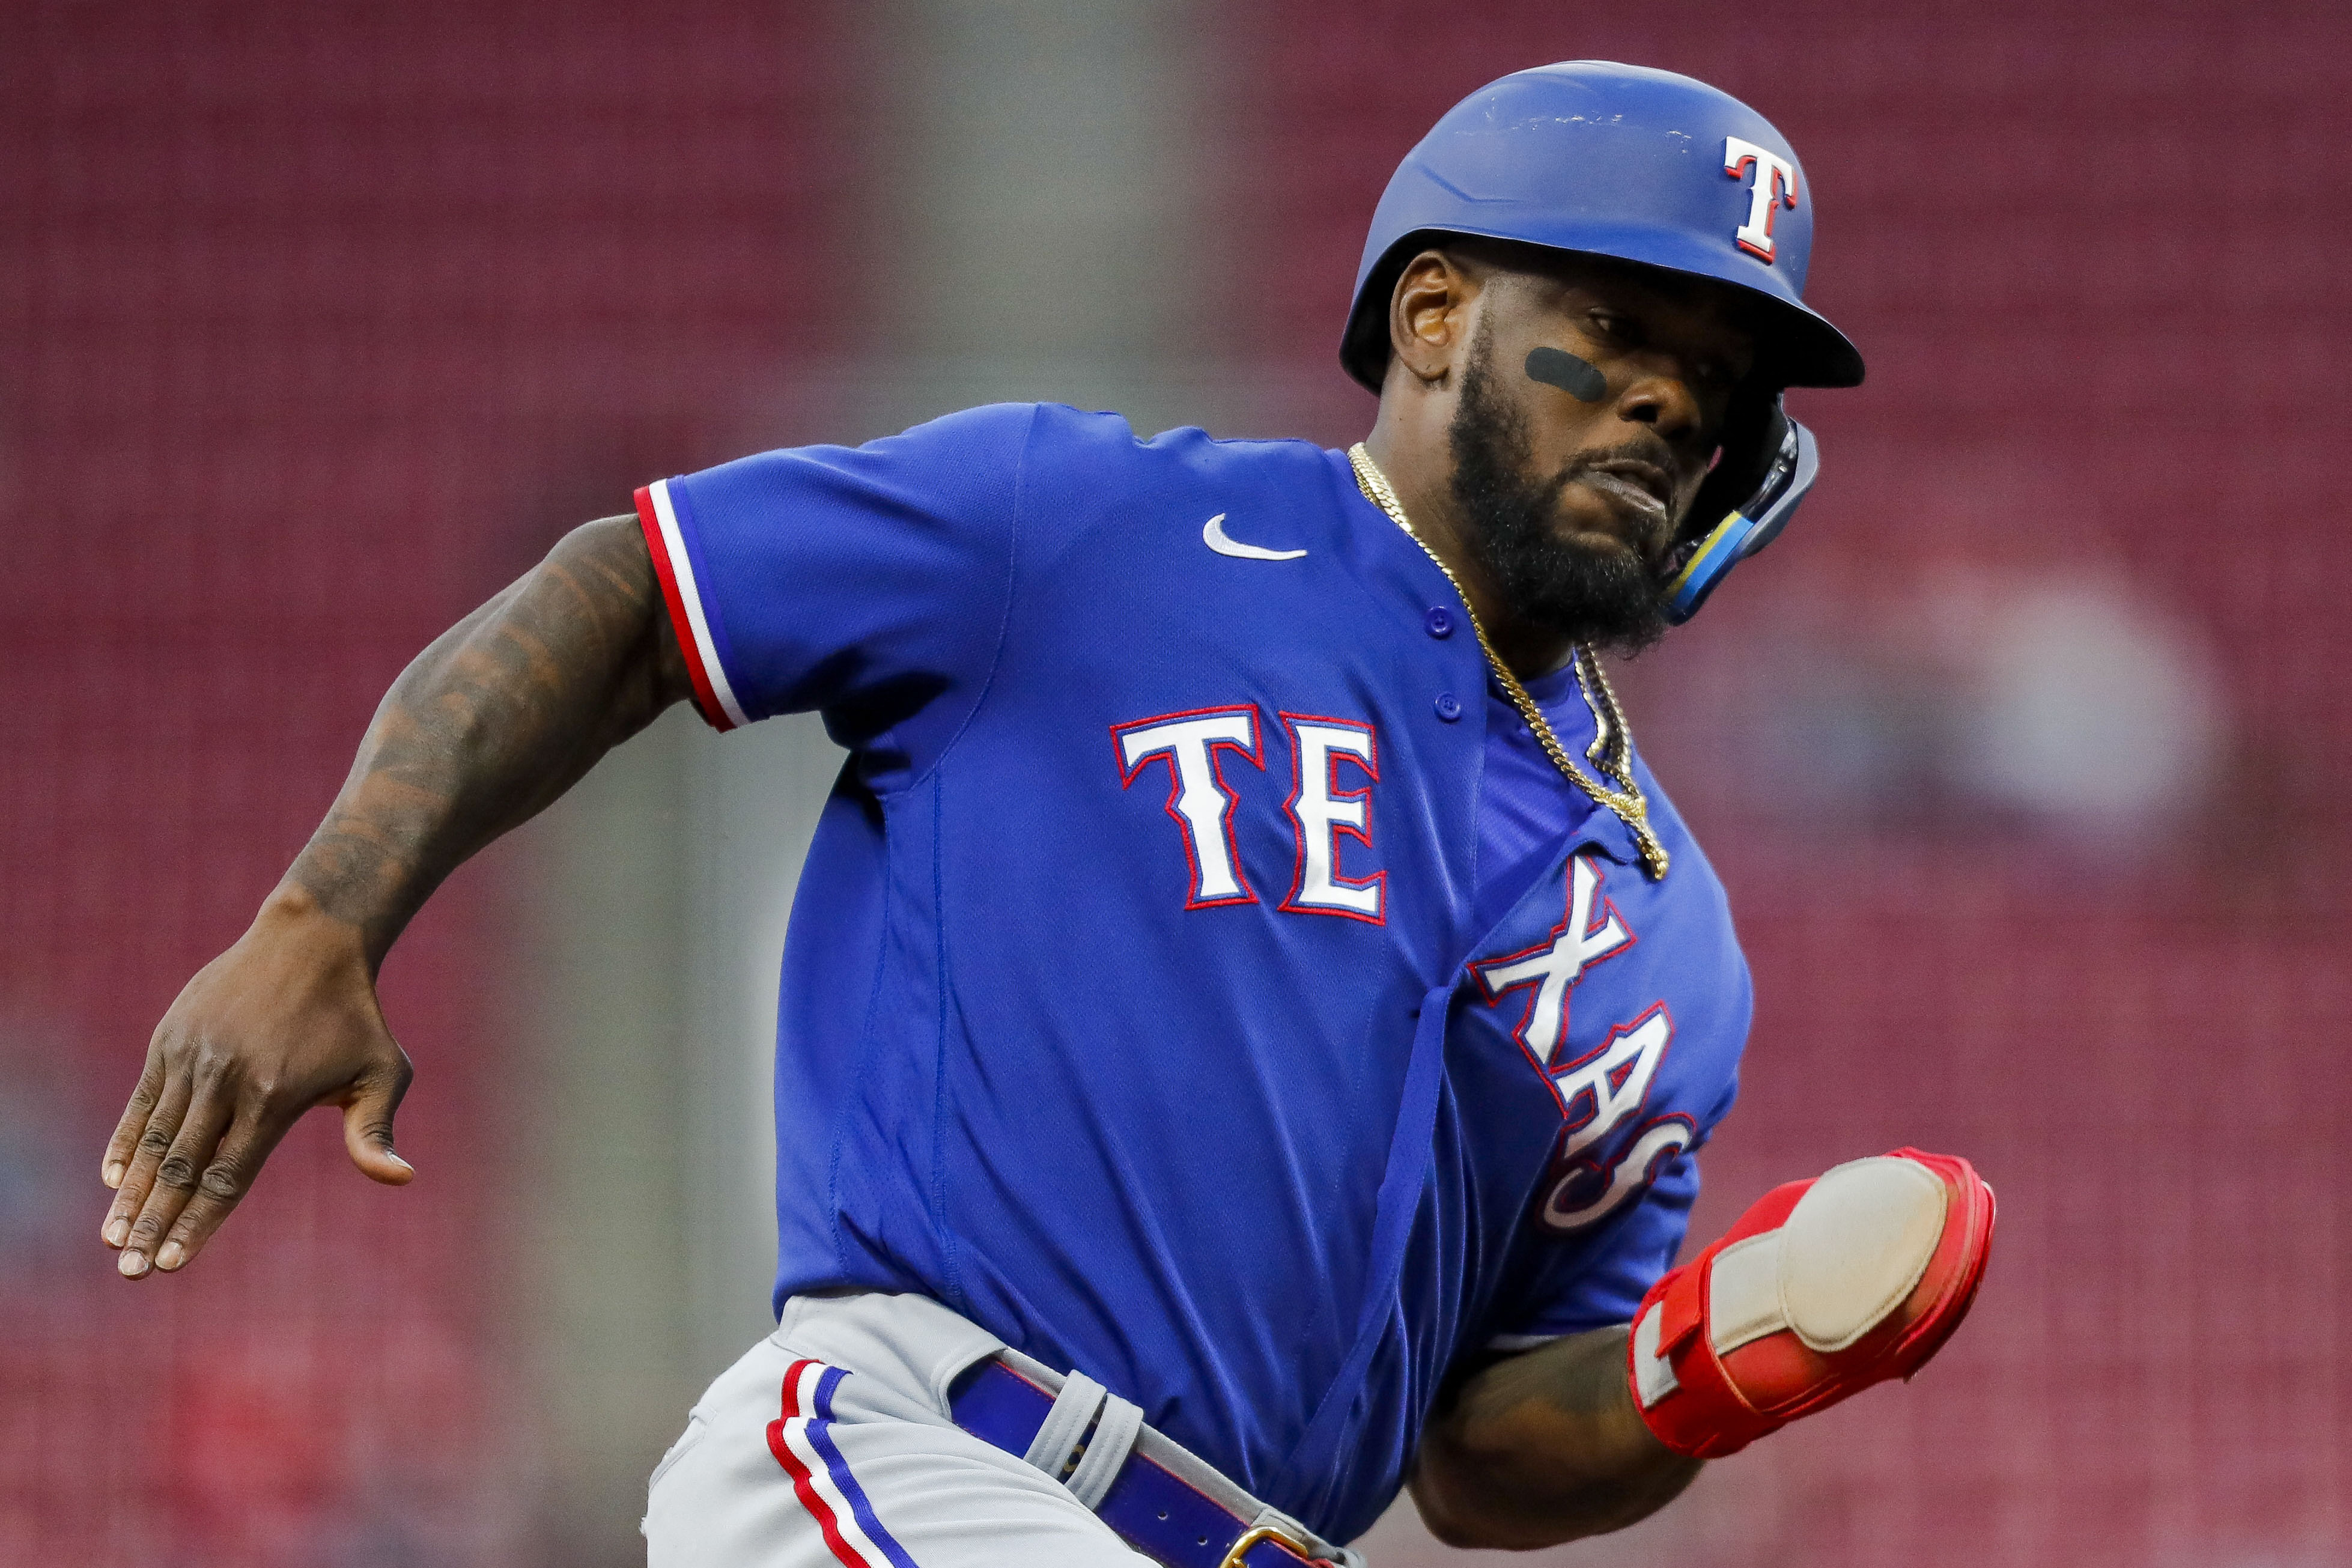 Nathaniel Lowe comes up big and helps propel the Texas Rangers to the ALCS